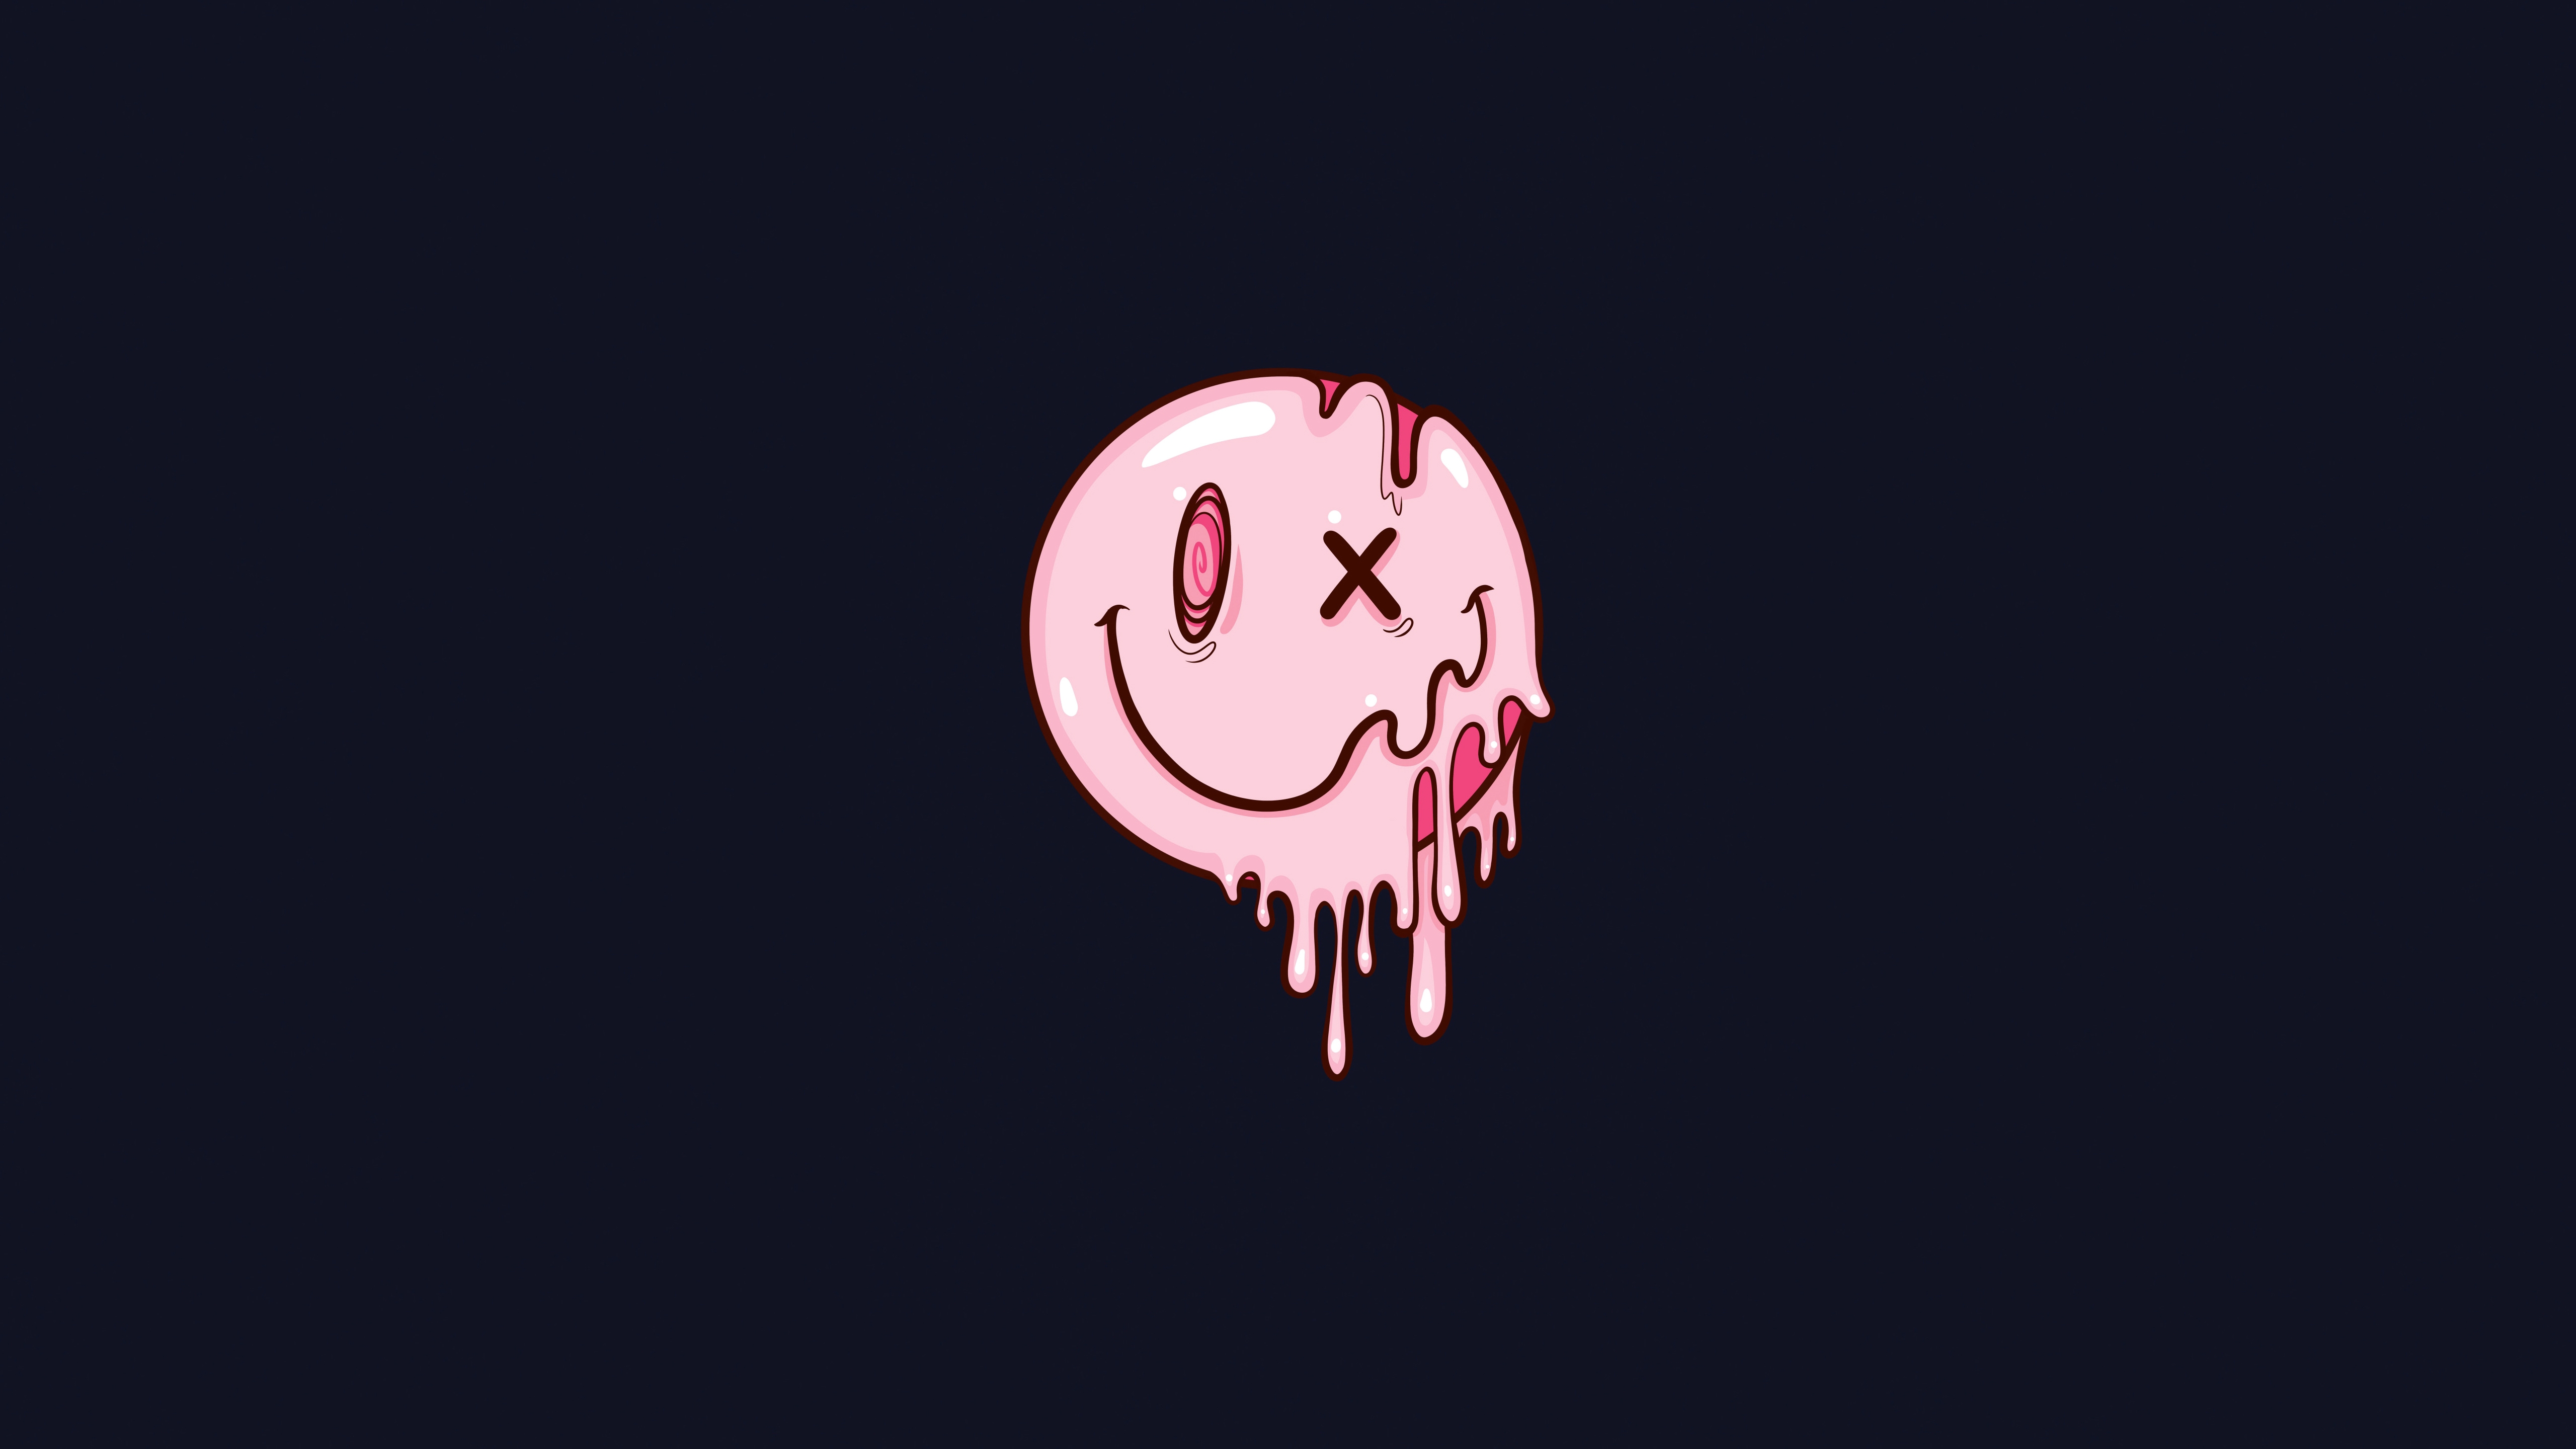 HD wallpaper, Dark Background, Simple, Drippy Smiley, Melting Smiley, Cute Smiley